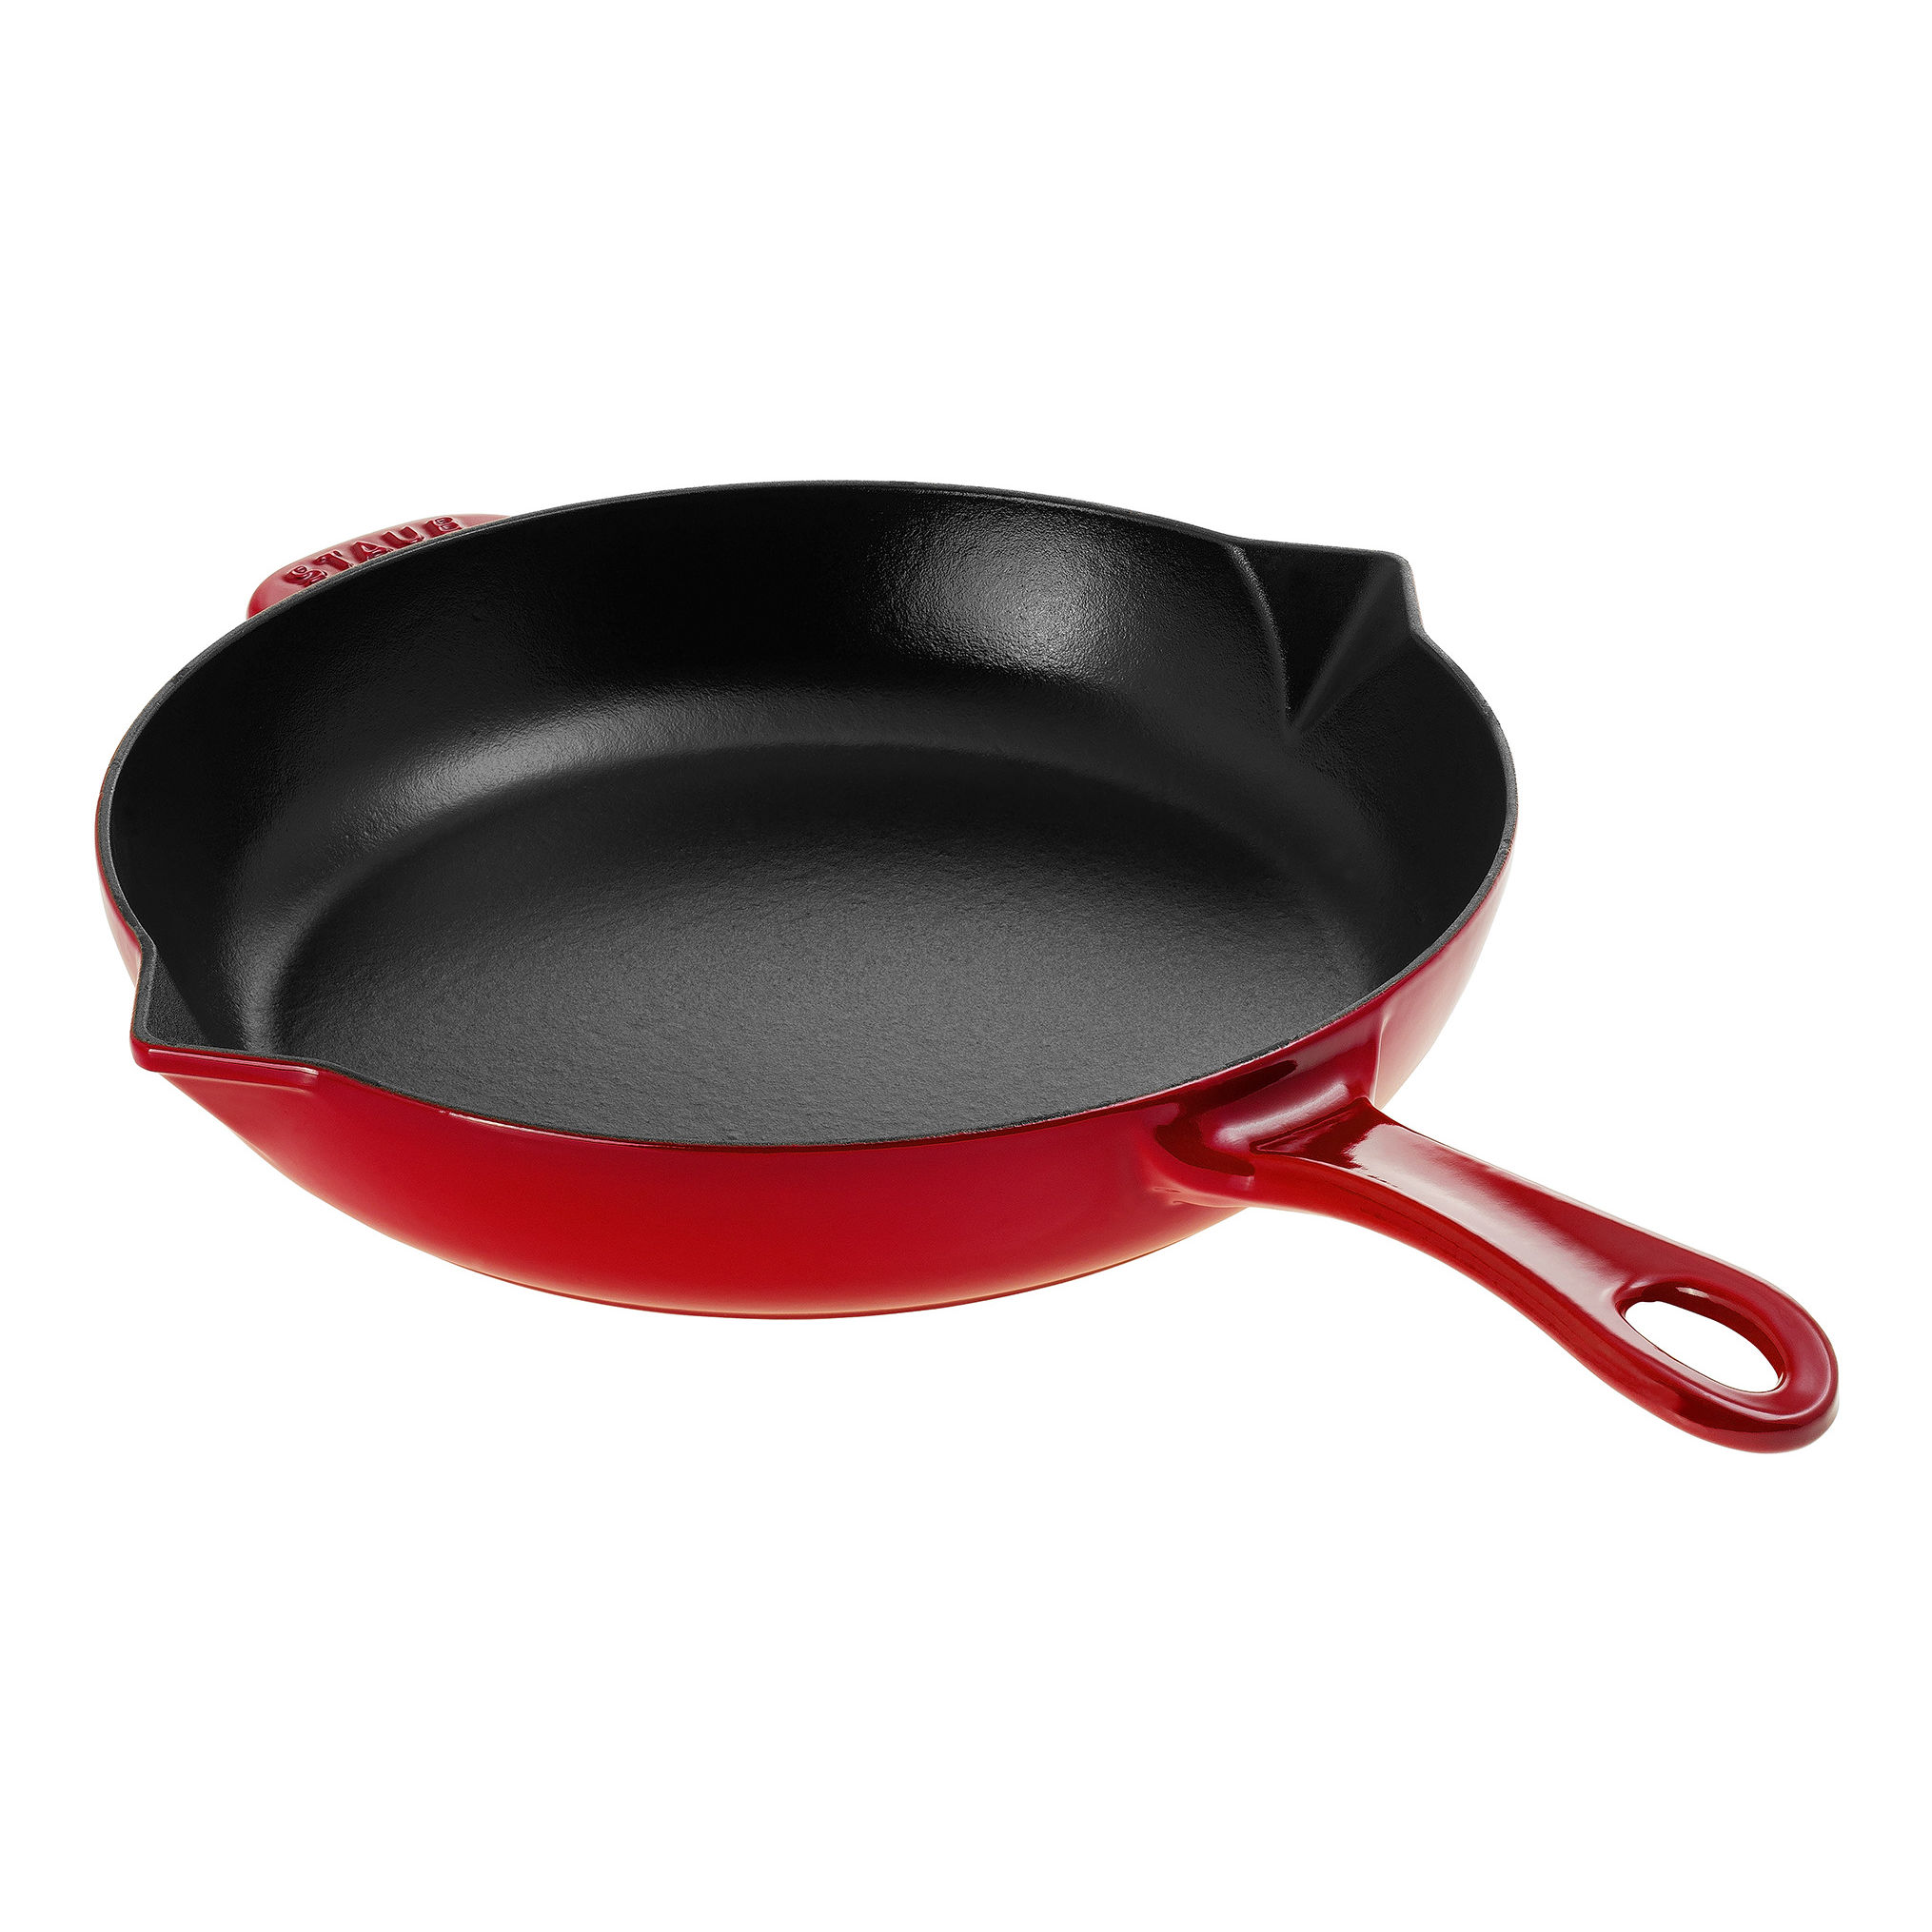 Staub - Frying pan - cast iron frying pan for induction with handle cm . 26